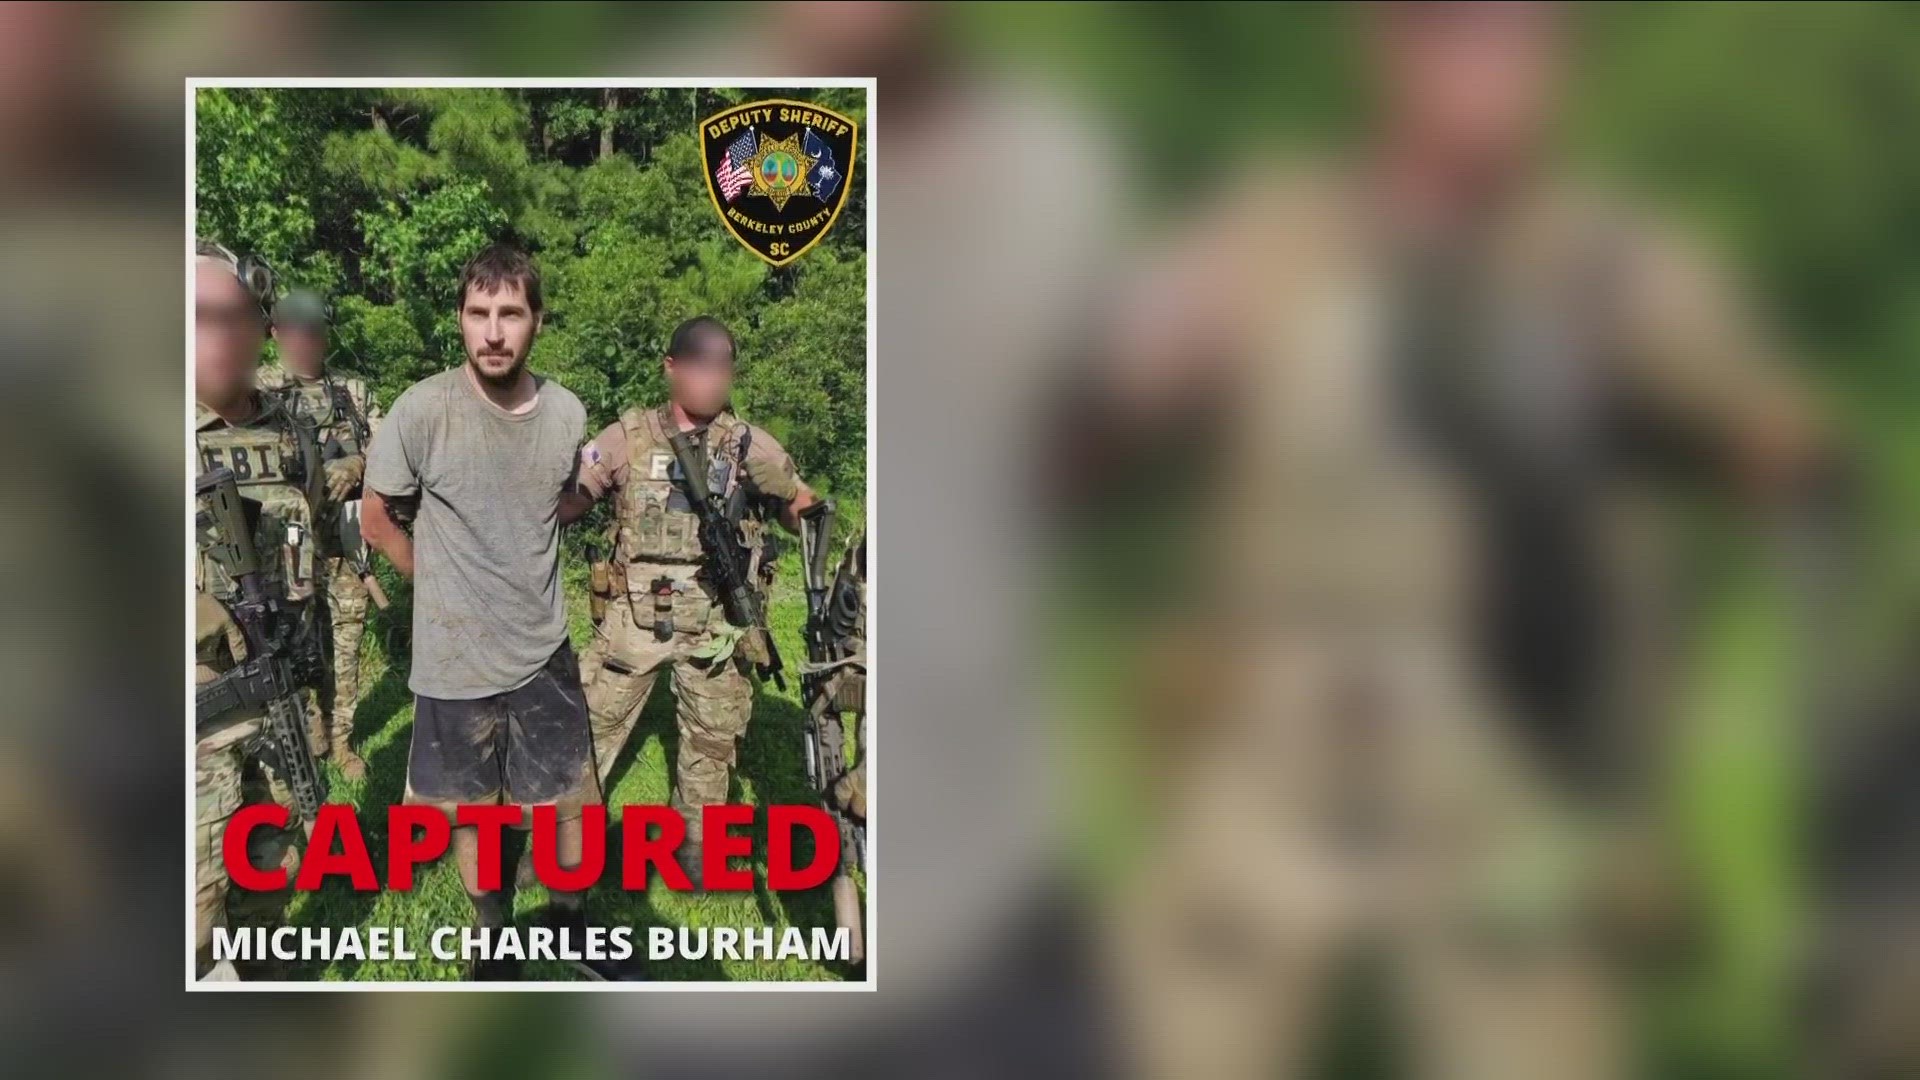 The FBI also released a letter Burham wrote to his father while running from authorities.